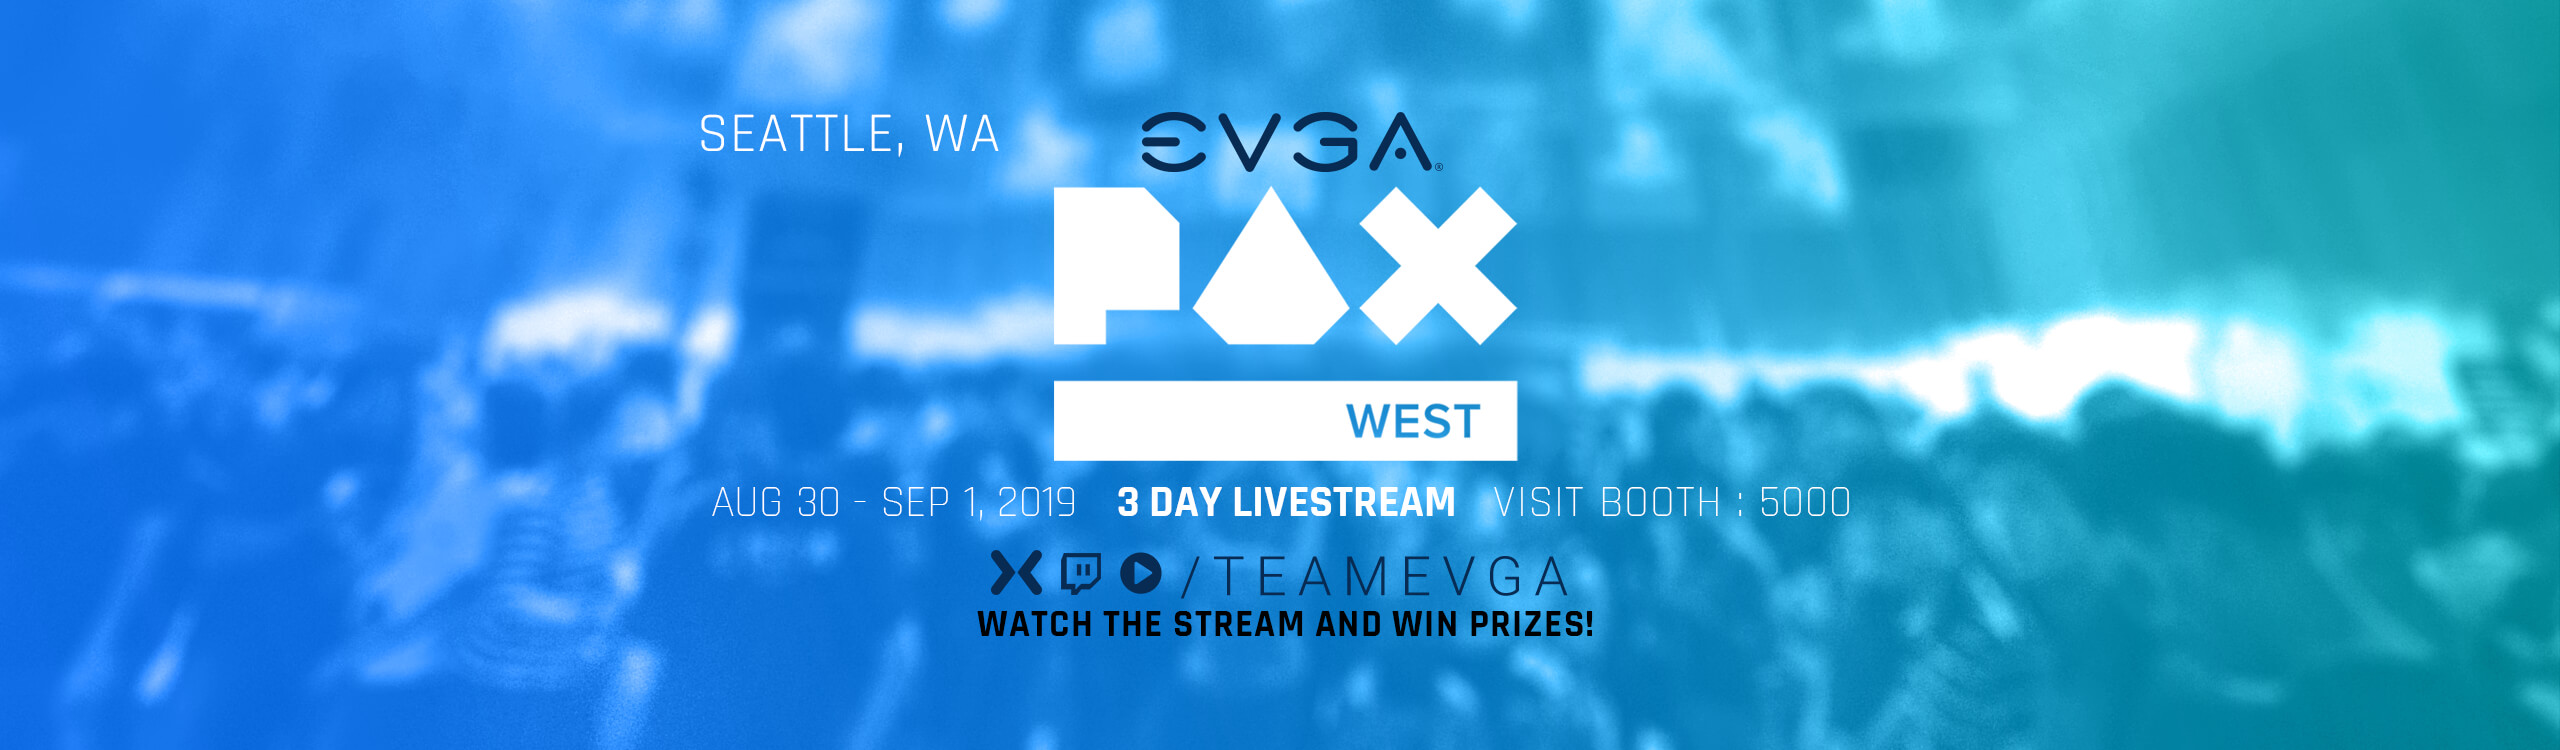 Join or Watch EVGA at PAX West 2019!